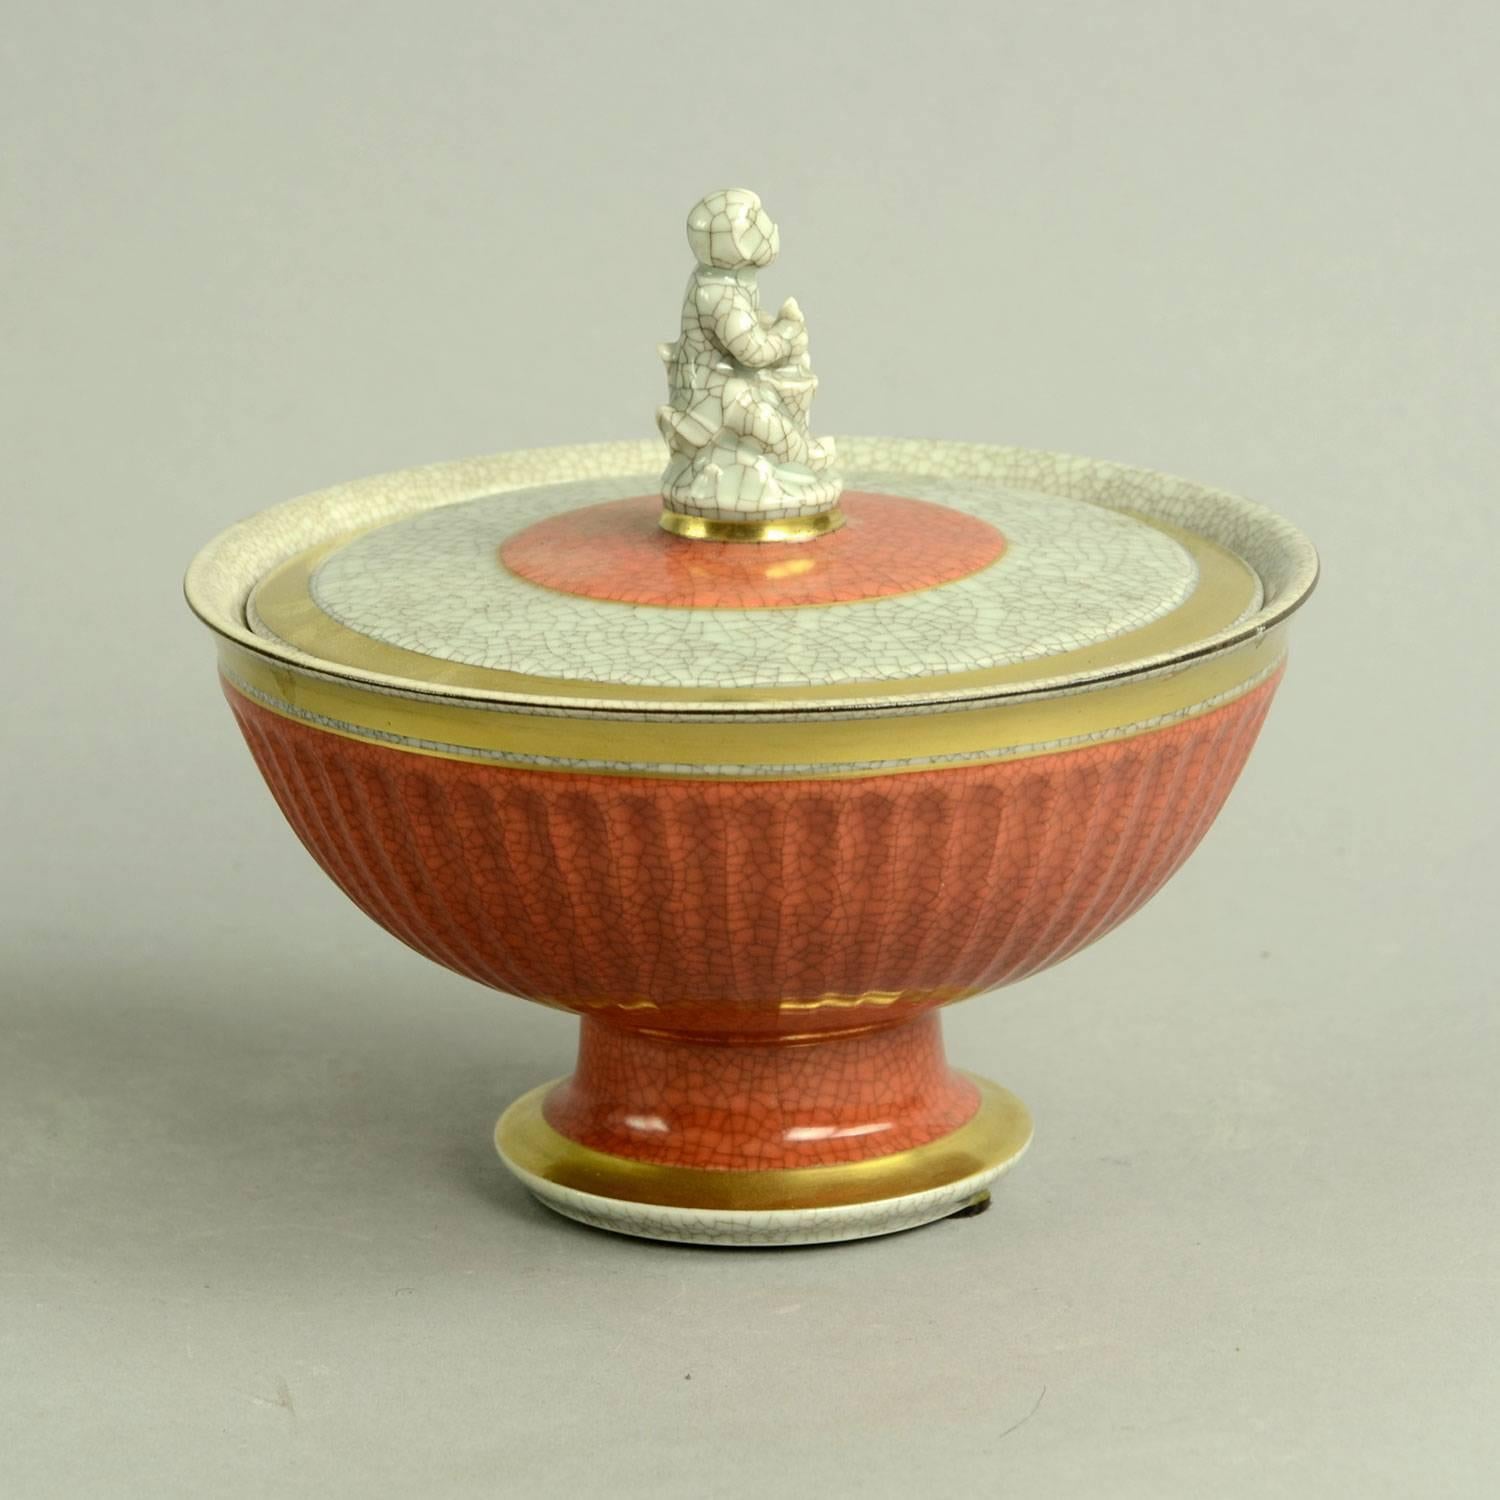 Porcelain lidded, footed bowl with figure of a child and dove to lid, gray and orange crackle glaze with gold leaf, 1950s-1960s.
Measures: Height 5 1/2" (14 cm), width 6" (15 cm) 
Excellent condition, no chips, cracks or repairs.